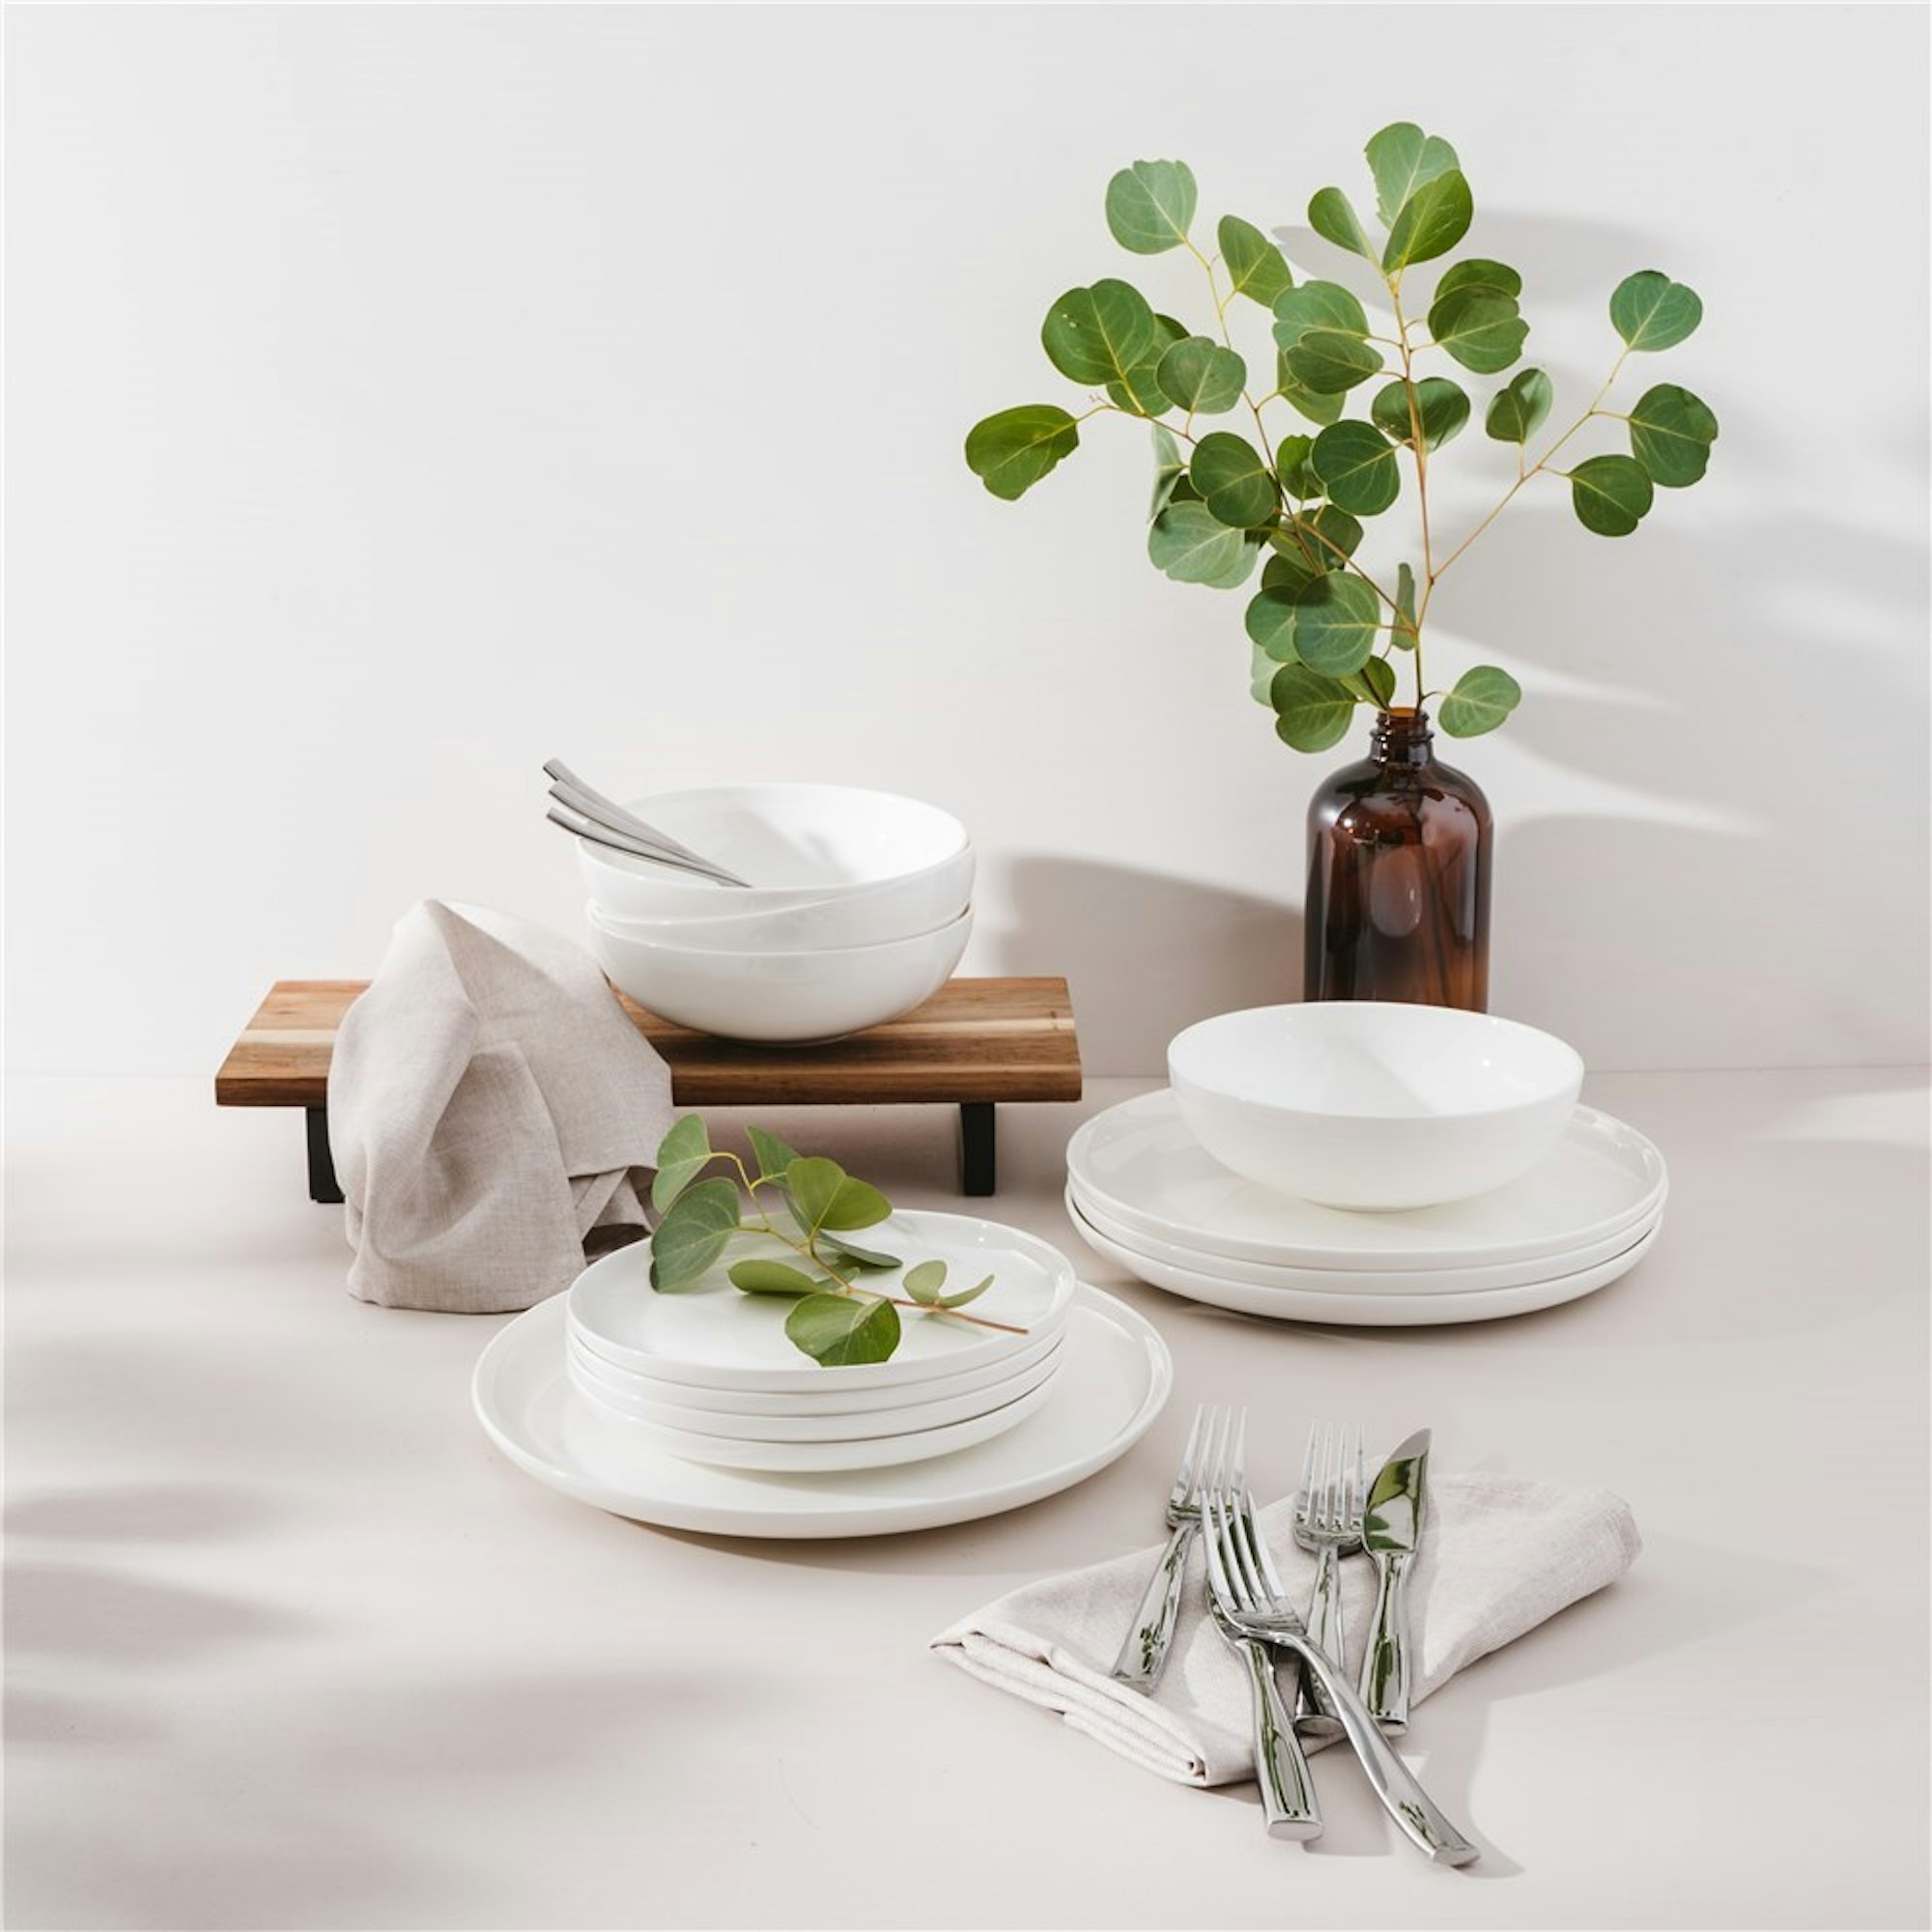 white dinner set stacked with greenery in vase